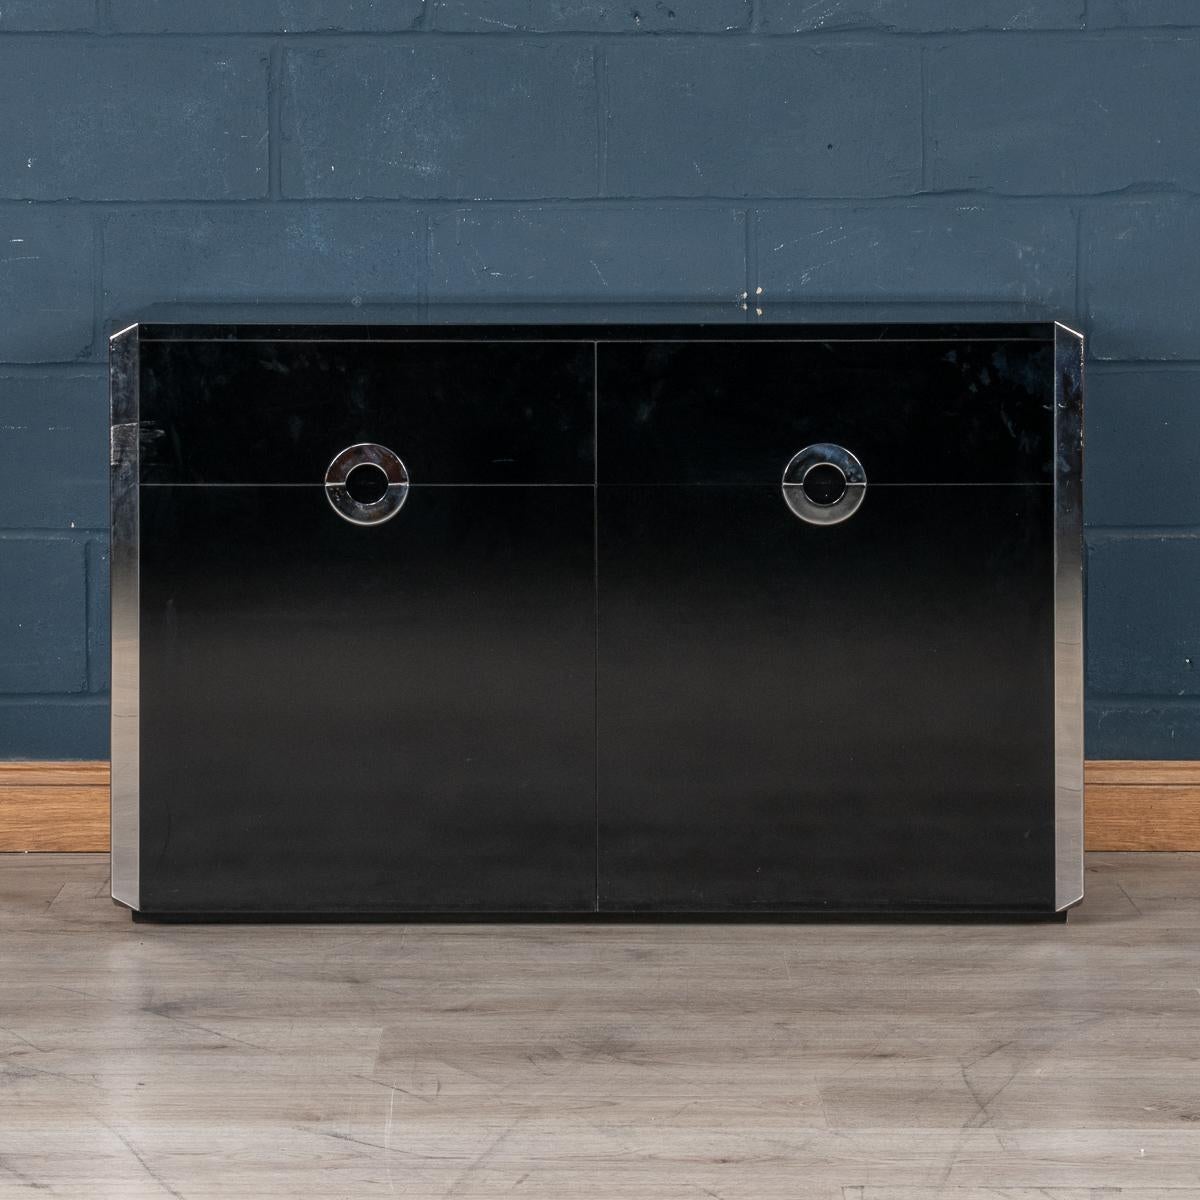 An elegant two-door sideboard designed by Willy Rizzo for Mario Sabot, produced in Italy in the 1970s. The gloss finish laminate veneer is beautifully accentuated by mirror polished stainless steel handles and edging. The two doors open 180 degrees